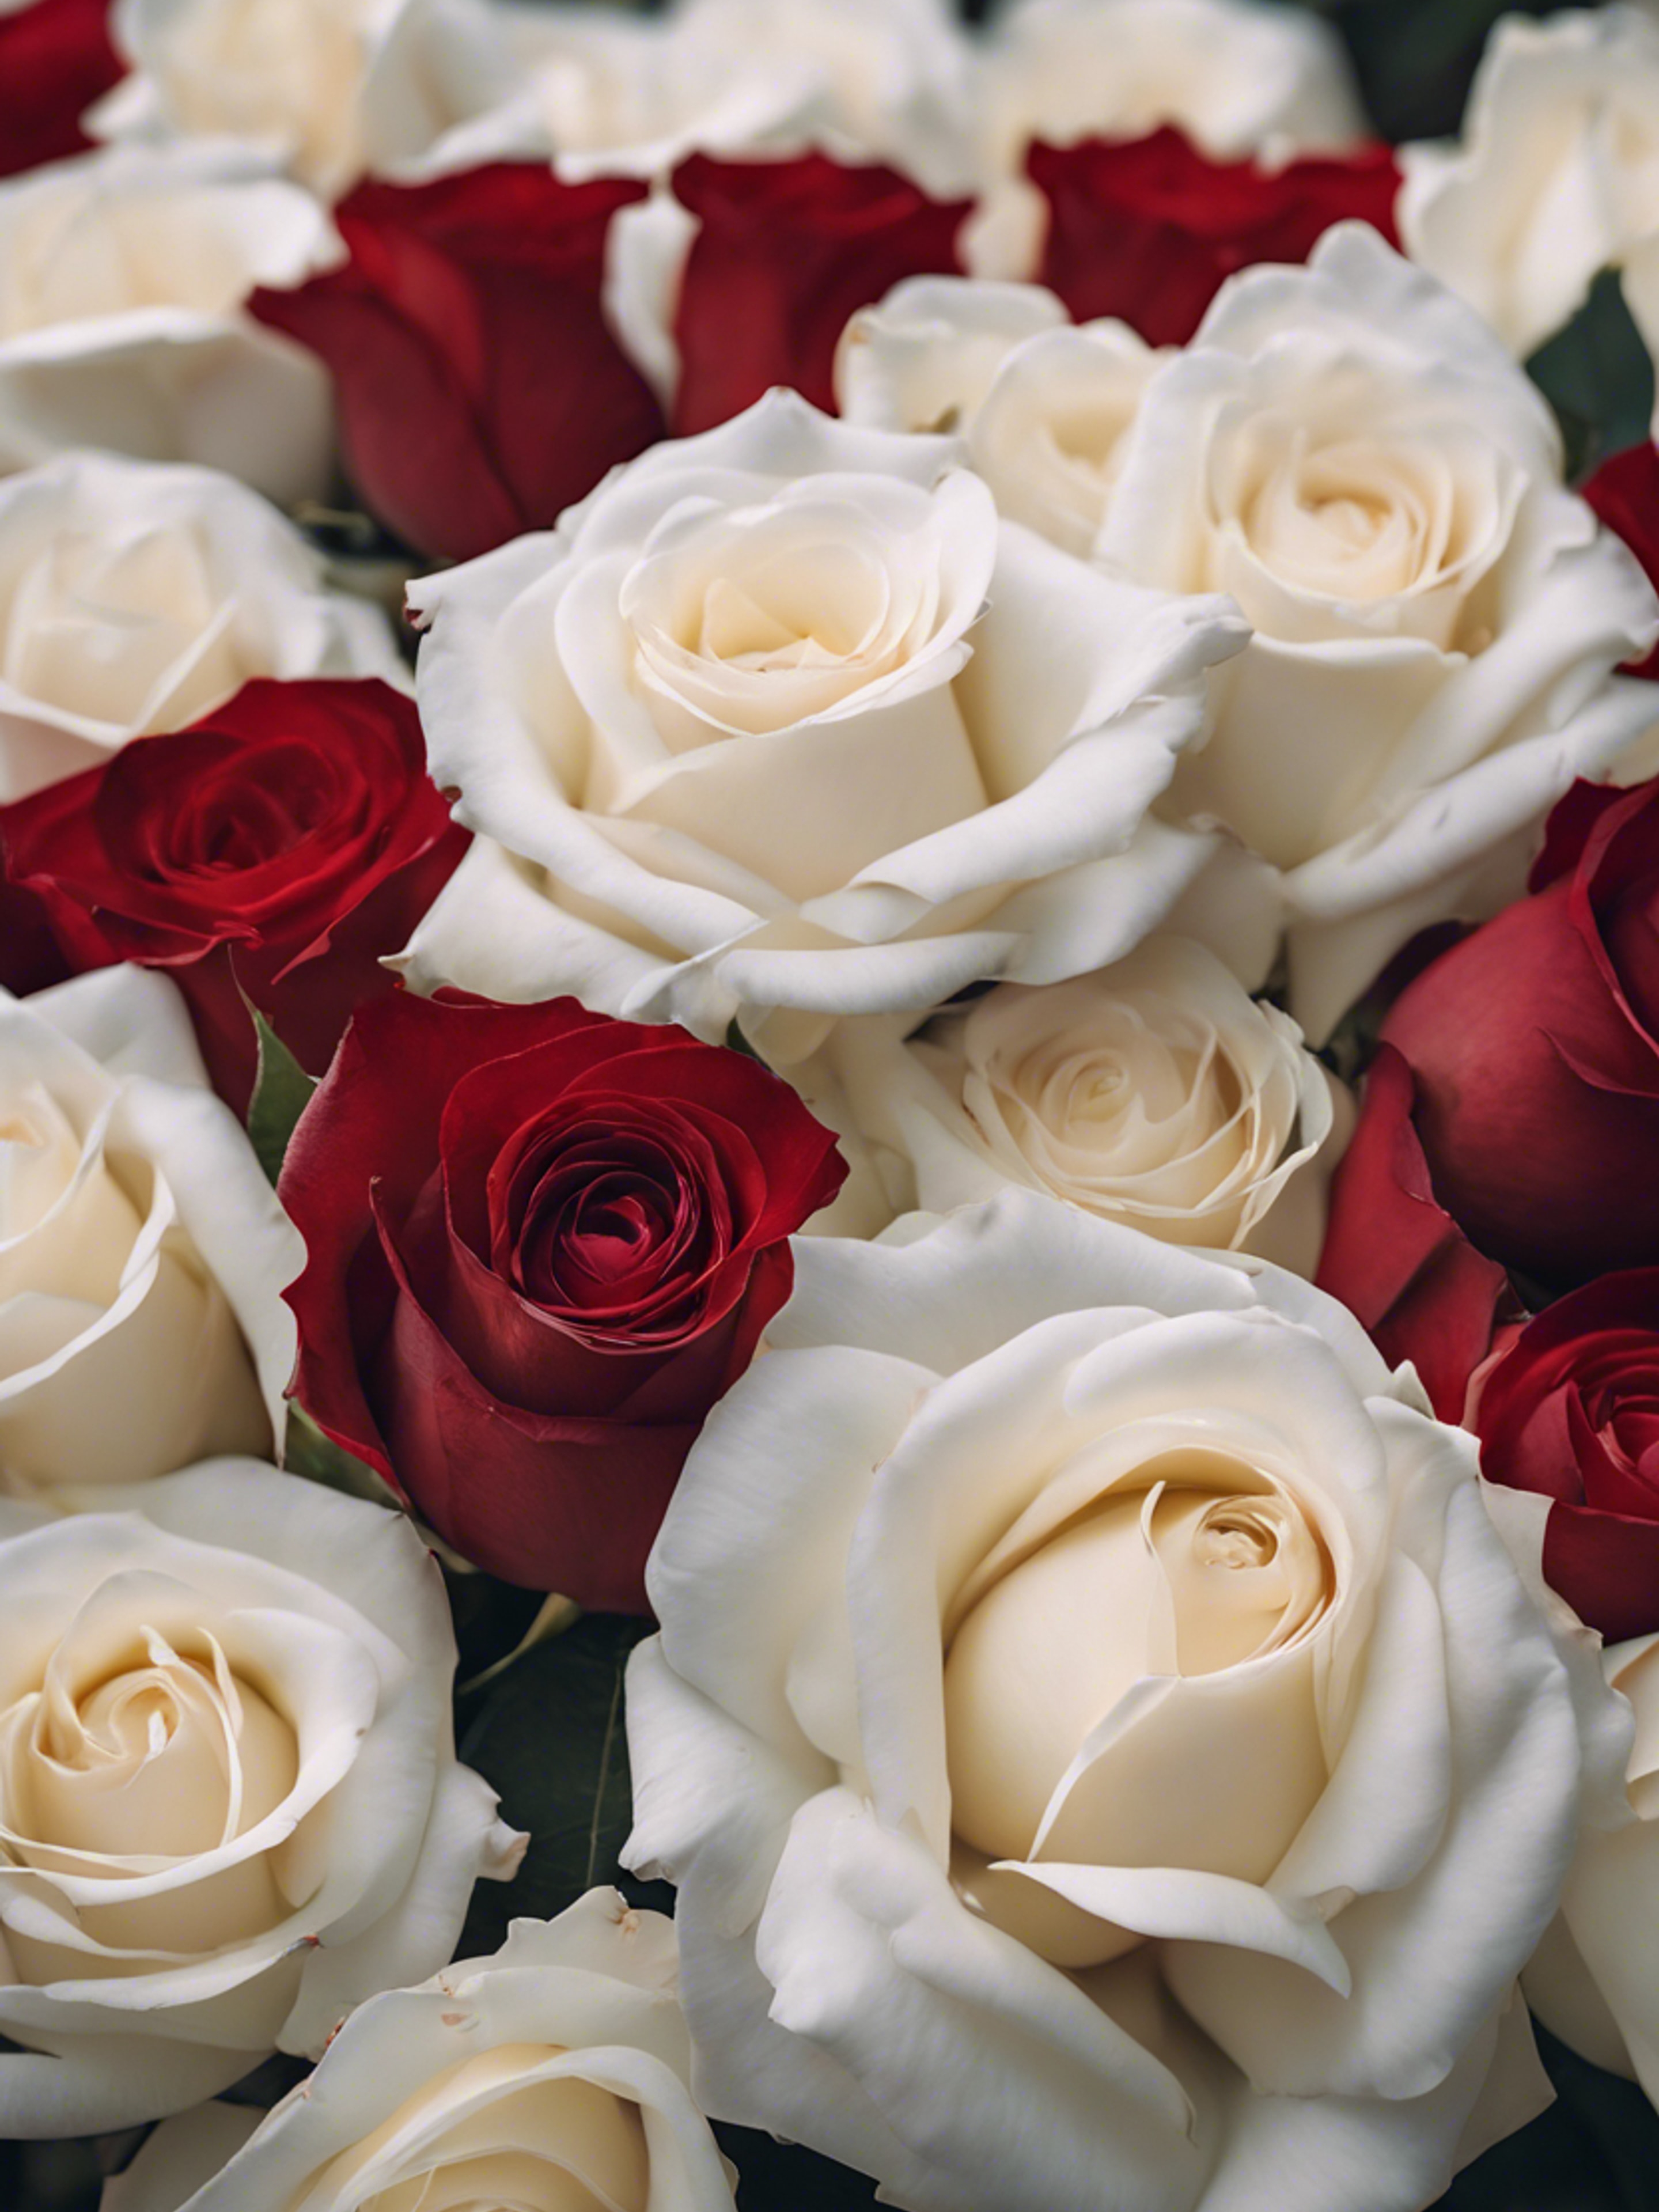 A cluster of white roses with a single red rose nestled in the middle. Tapeta[ffa8b13685ab483b9eca]